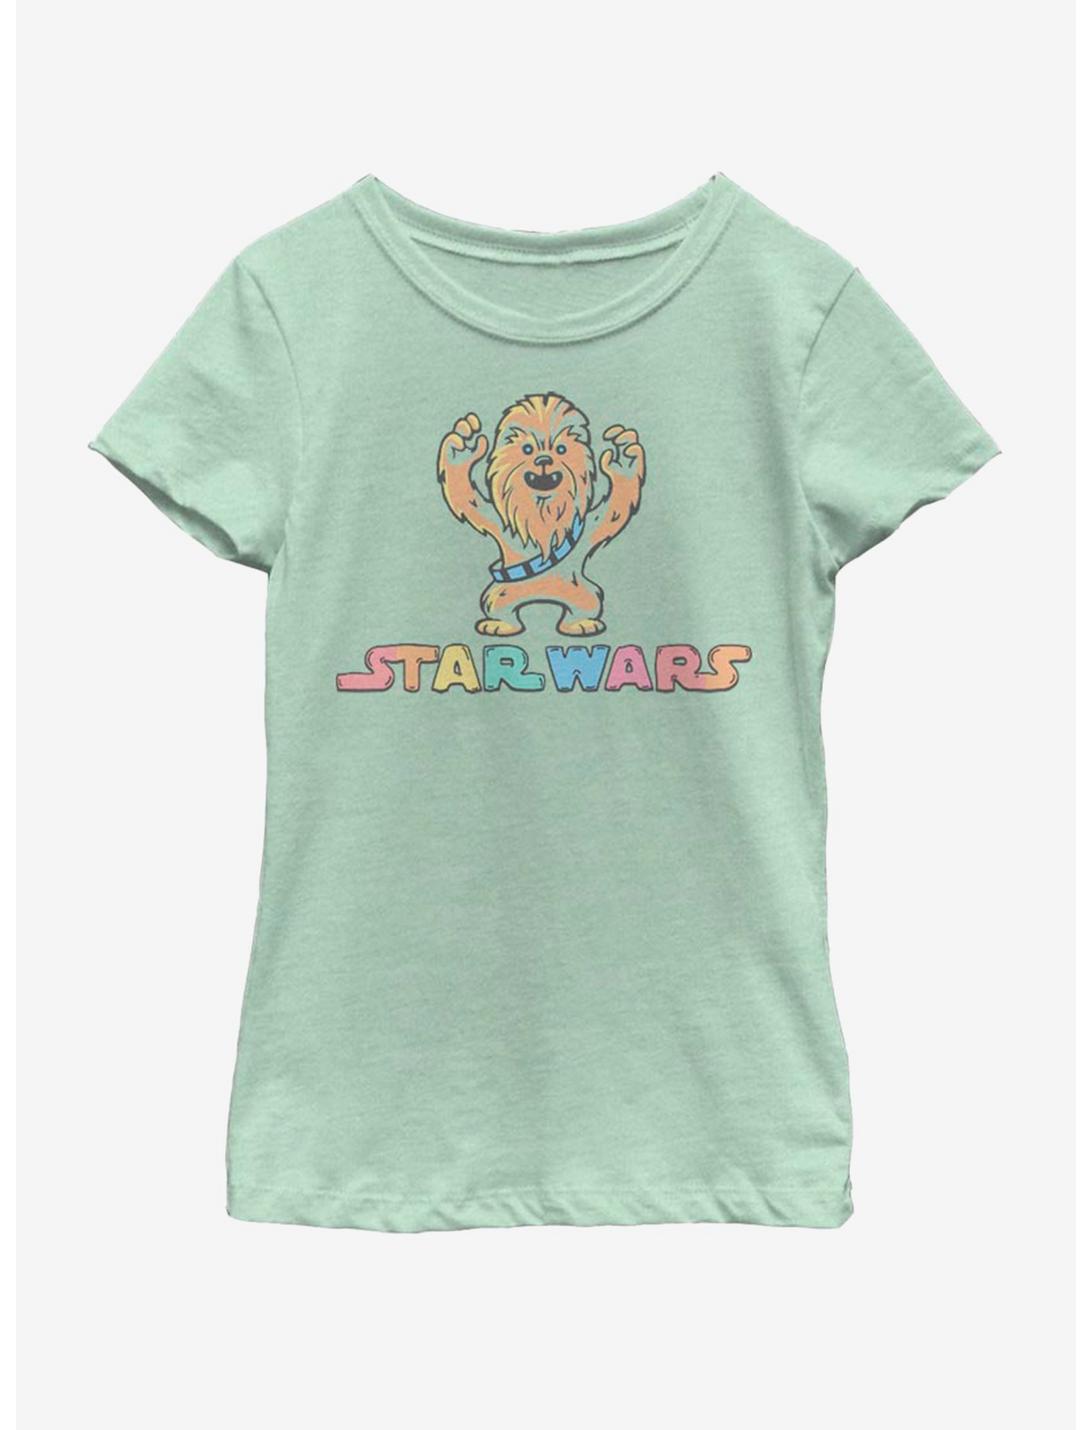 Star Wars Colorin Chewbacca Youth Girls T-Shirt, MINT, hi-res